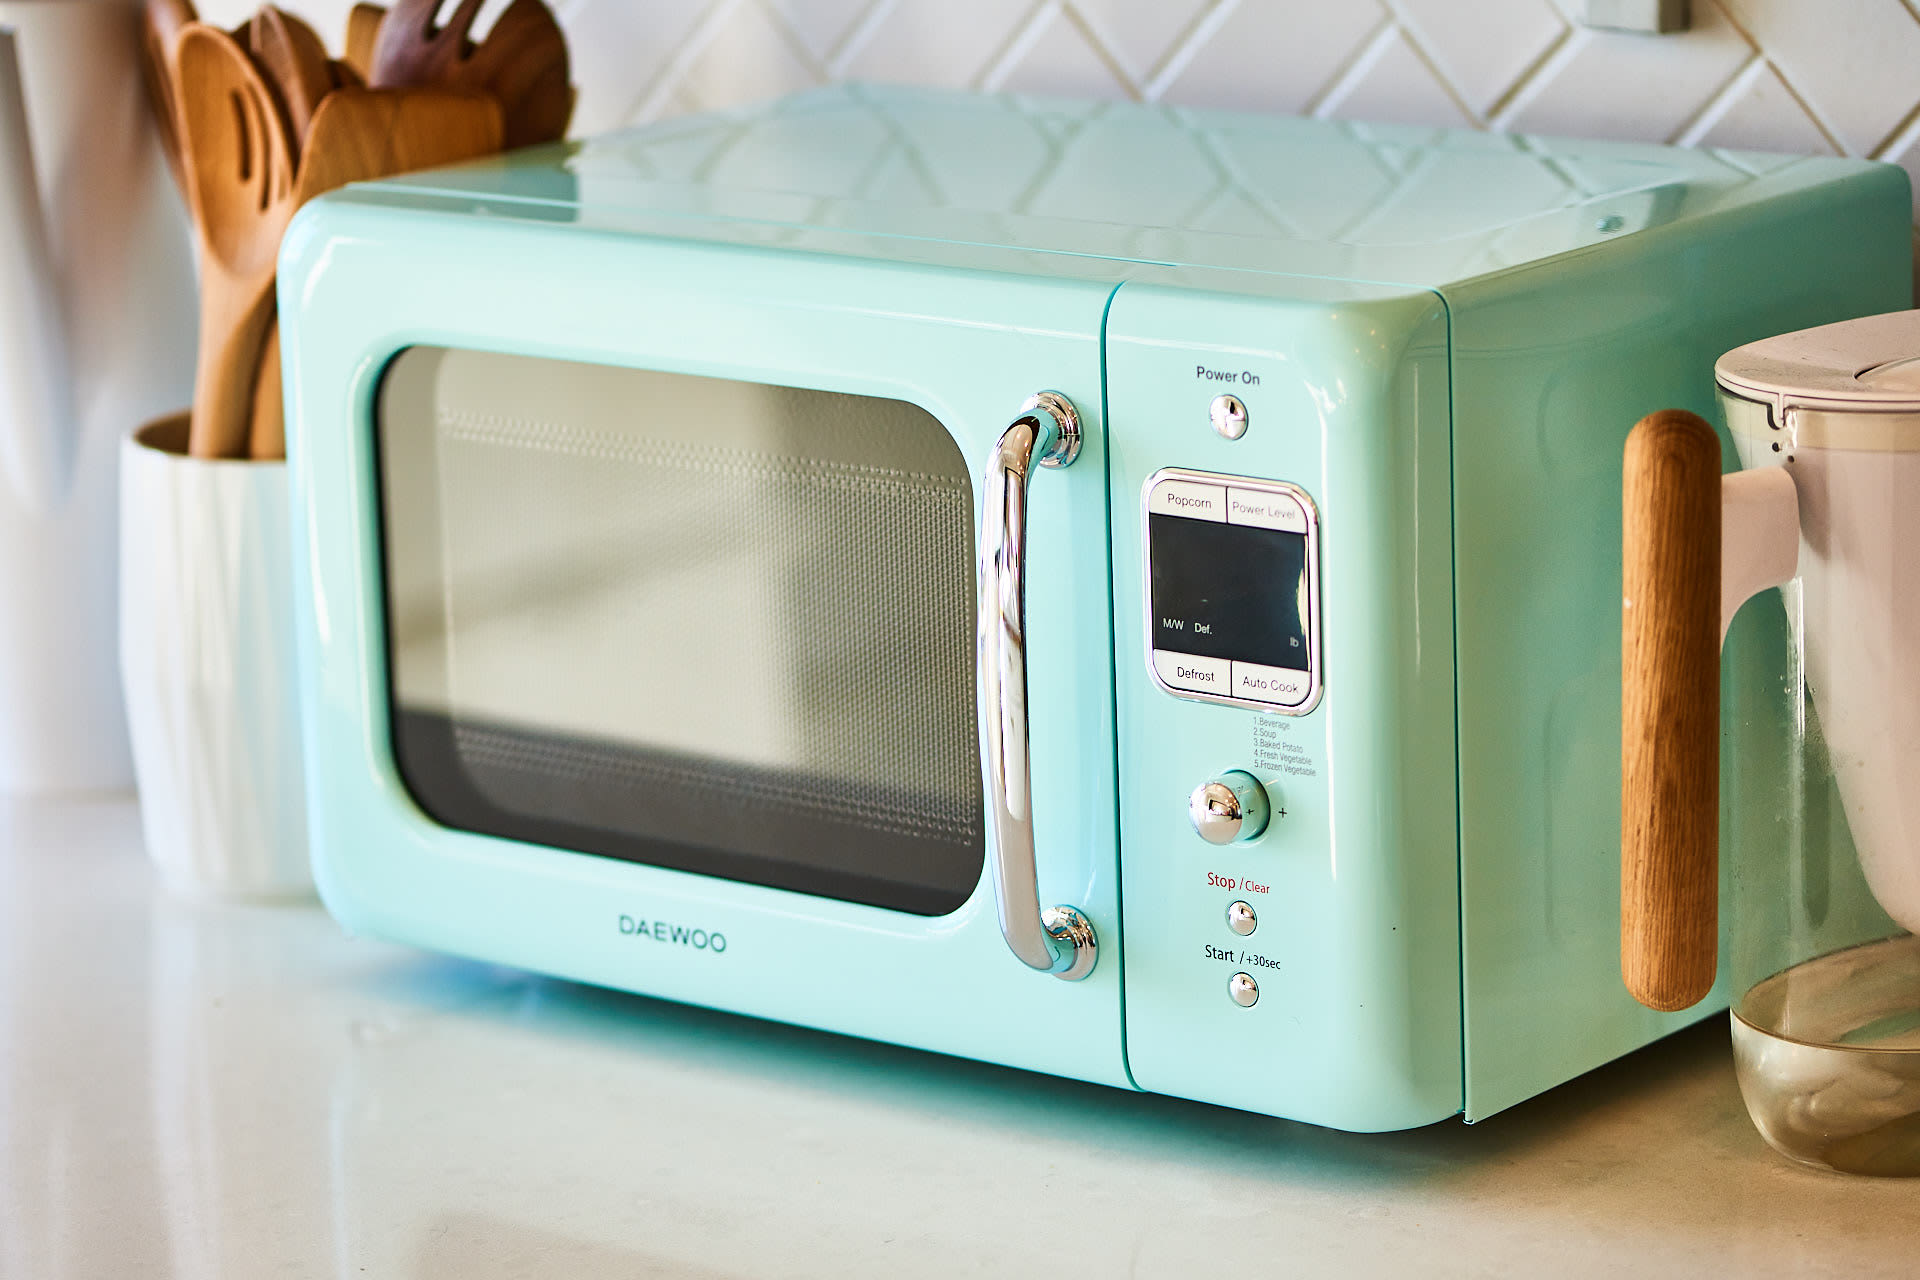 The Best Way to Clean Dirty Microwave Oven At Home 